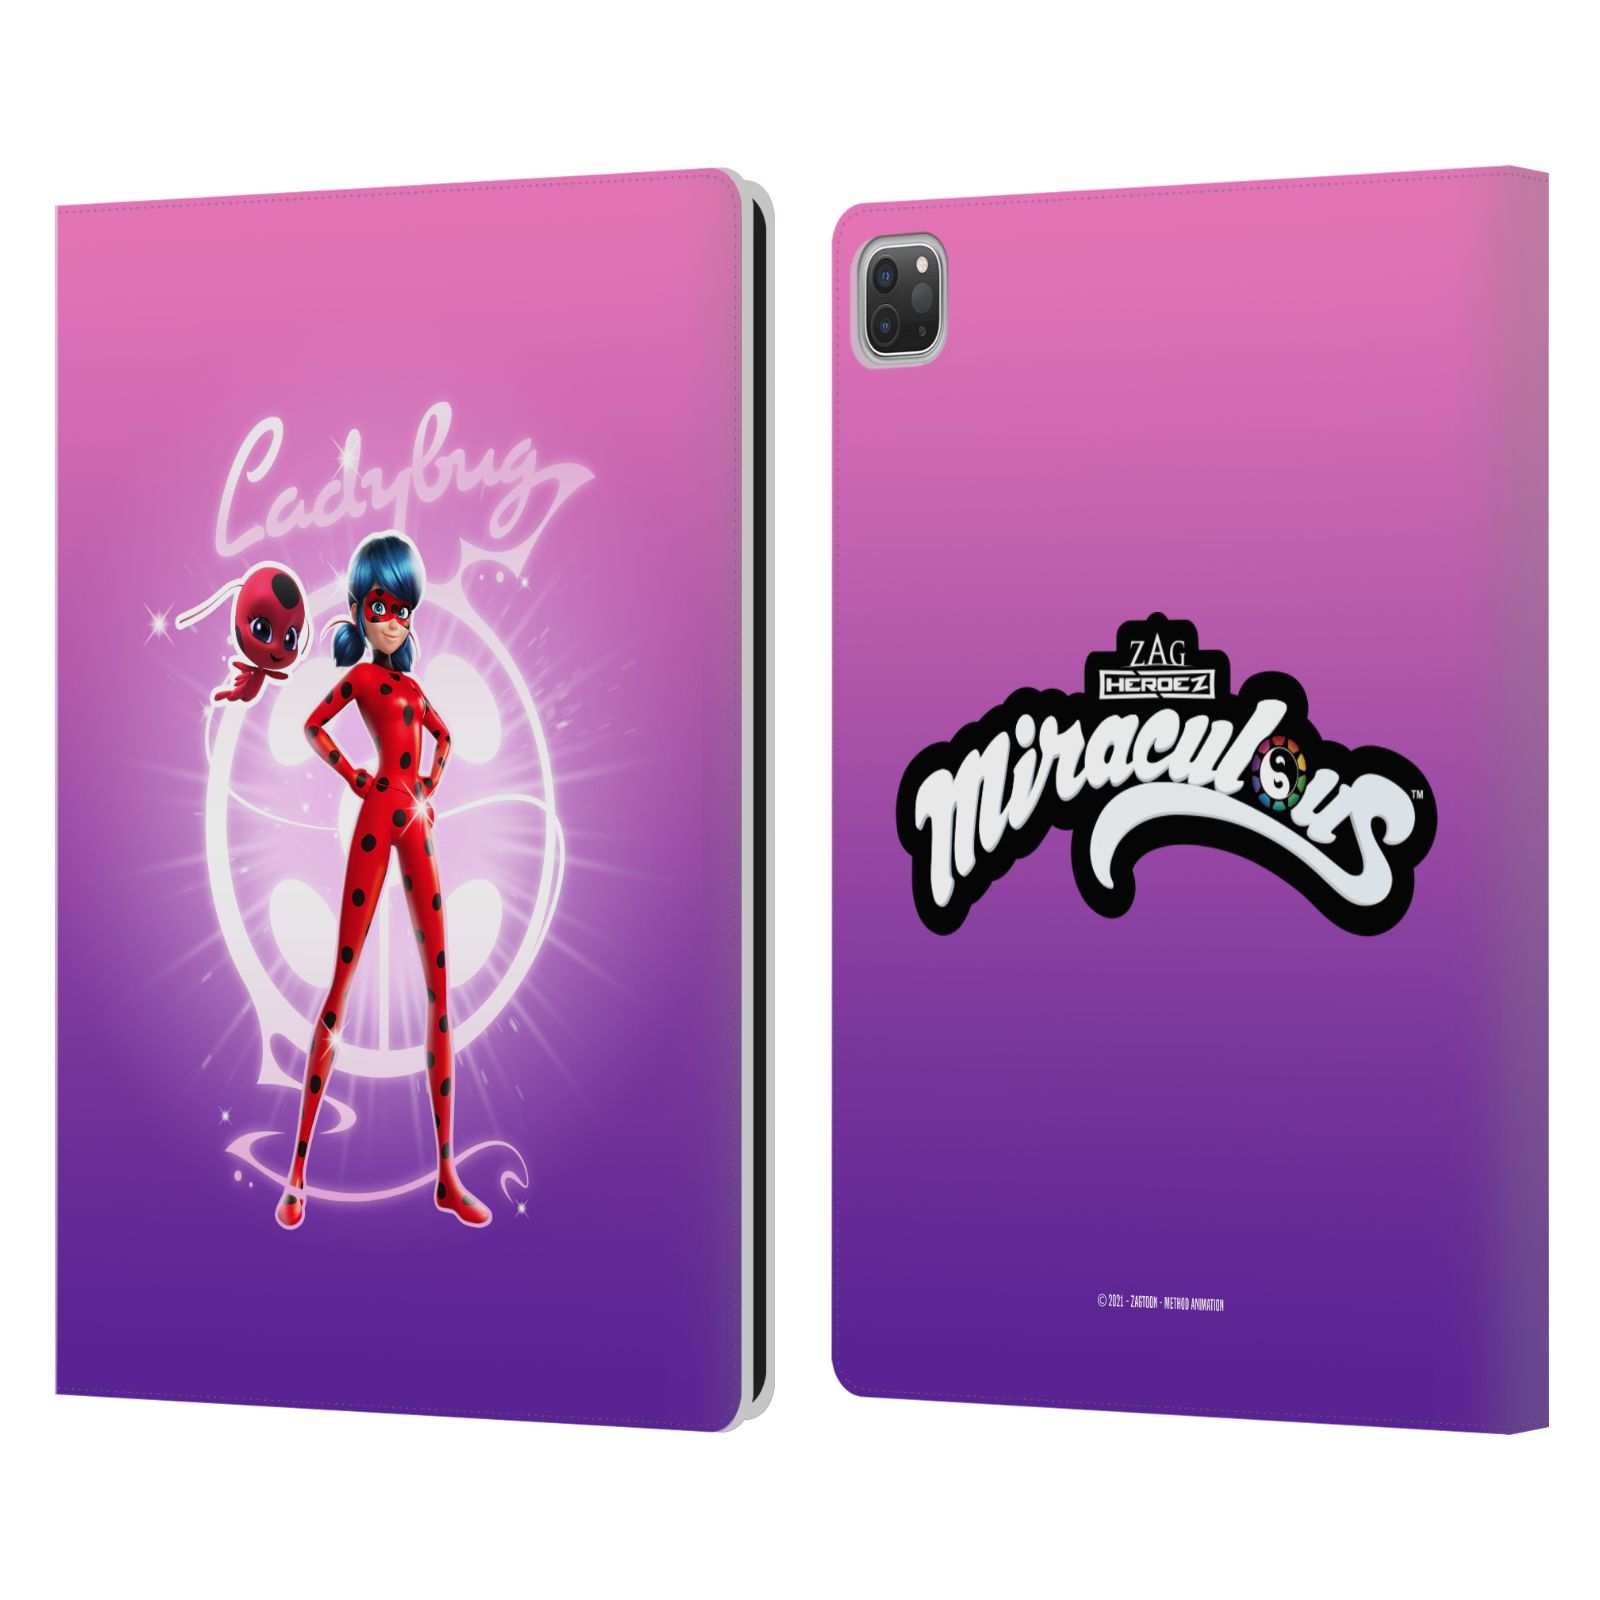 Miraculous: Tales of Ladybug and Cat Noir - Apple TV (BR)